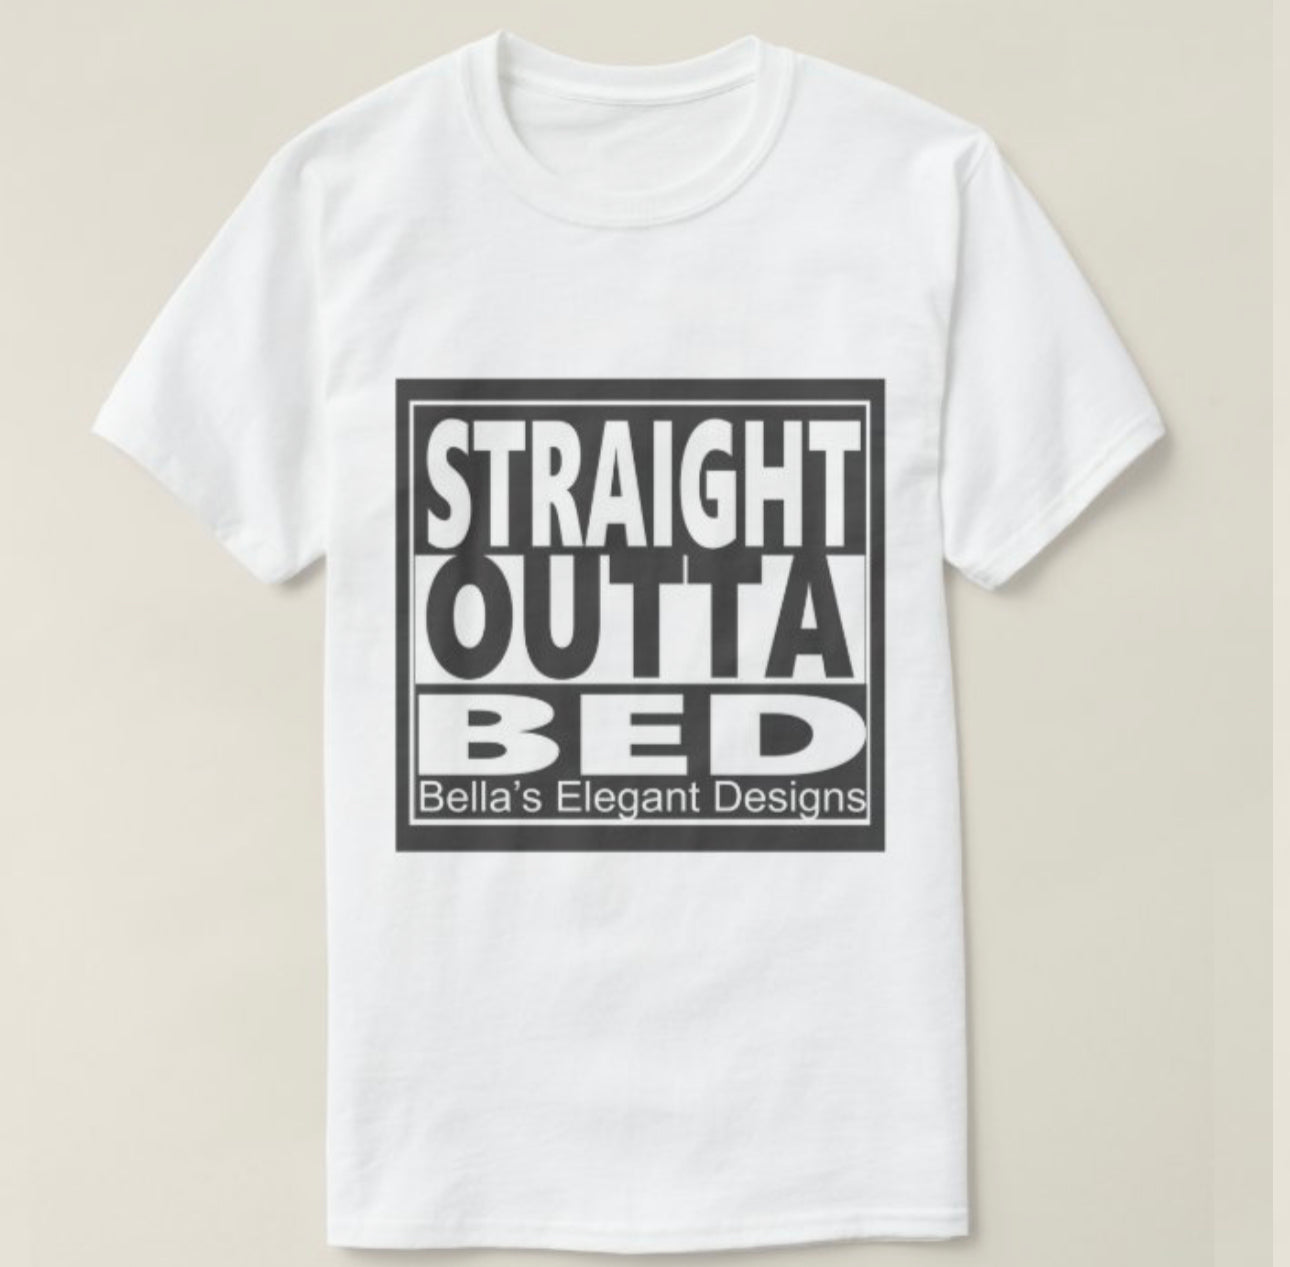 STRAIGHT OUTTA BED T-SHIRT